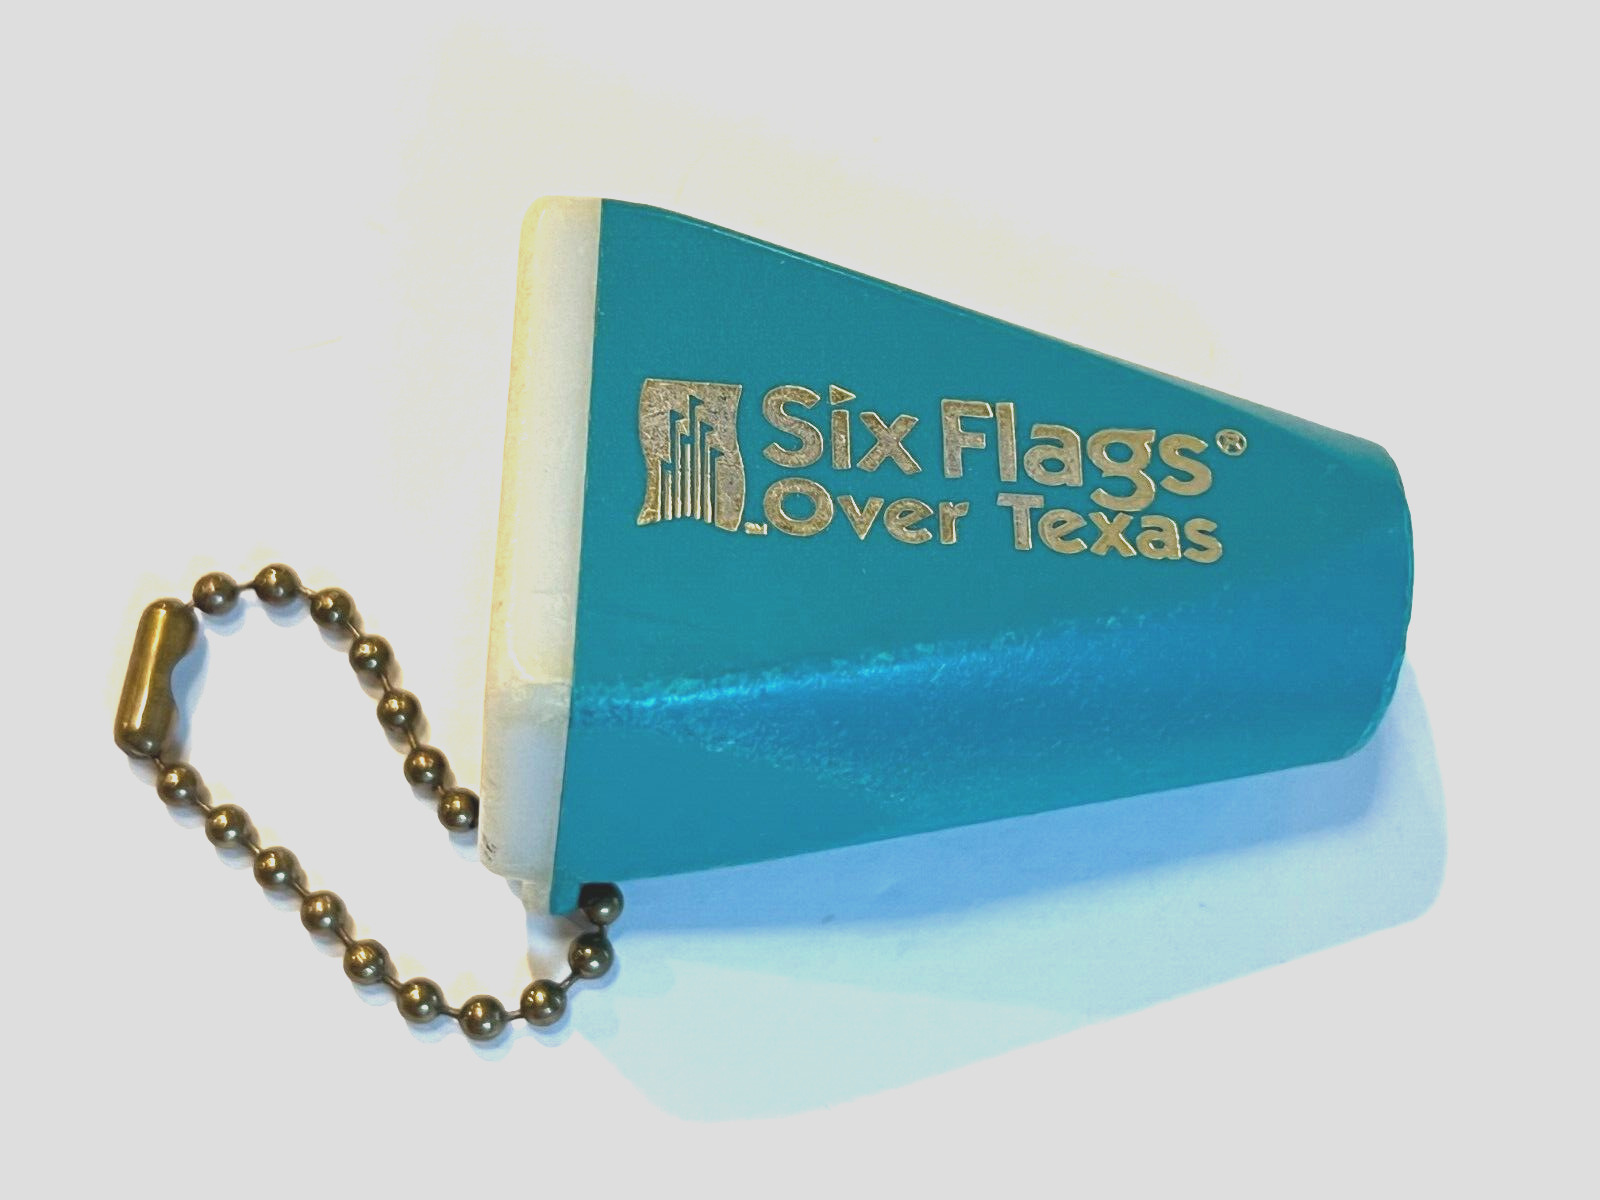 Six Flags Over Texas Picture Viewer with Chain Vintage Souvenir